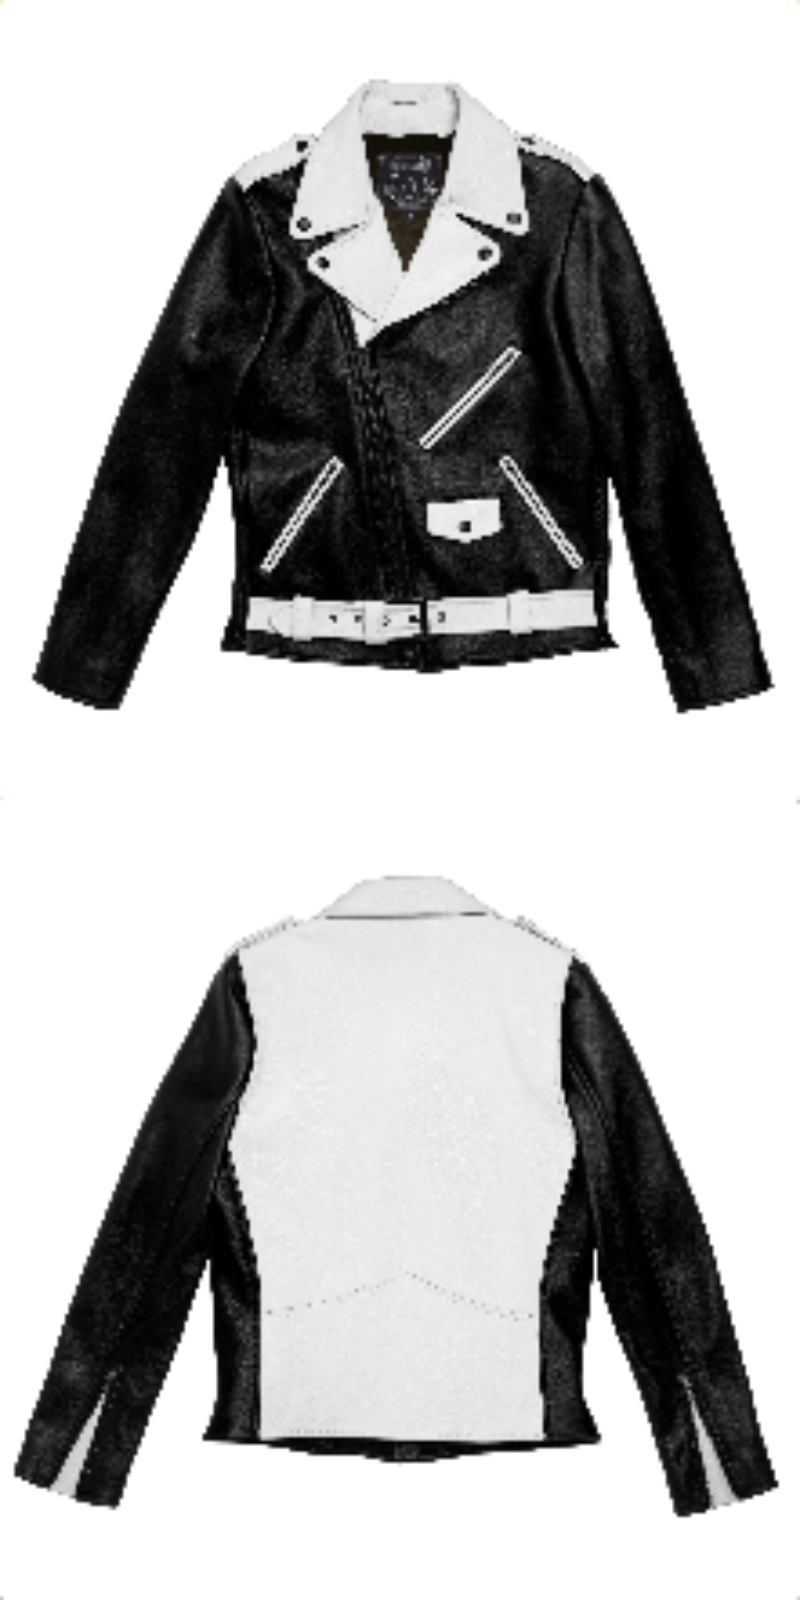 Custom Bowery Jacket Women - Customer's Product with price 2095.00 ID FxPeWxQvG_kG1SxsxRFCrlcz